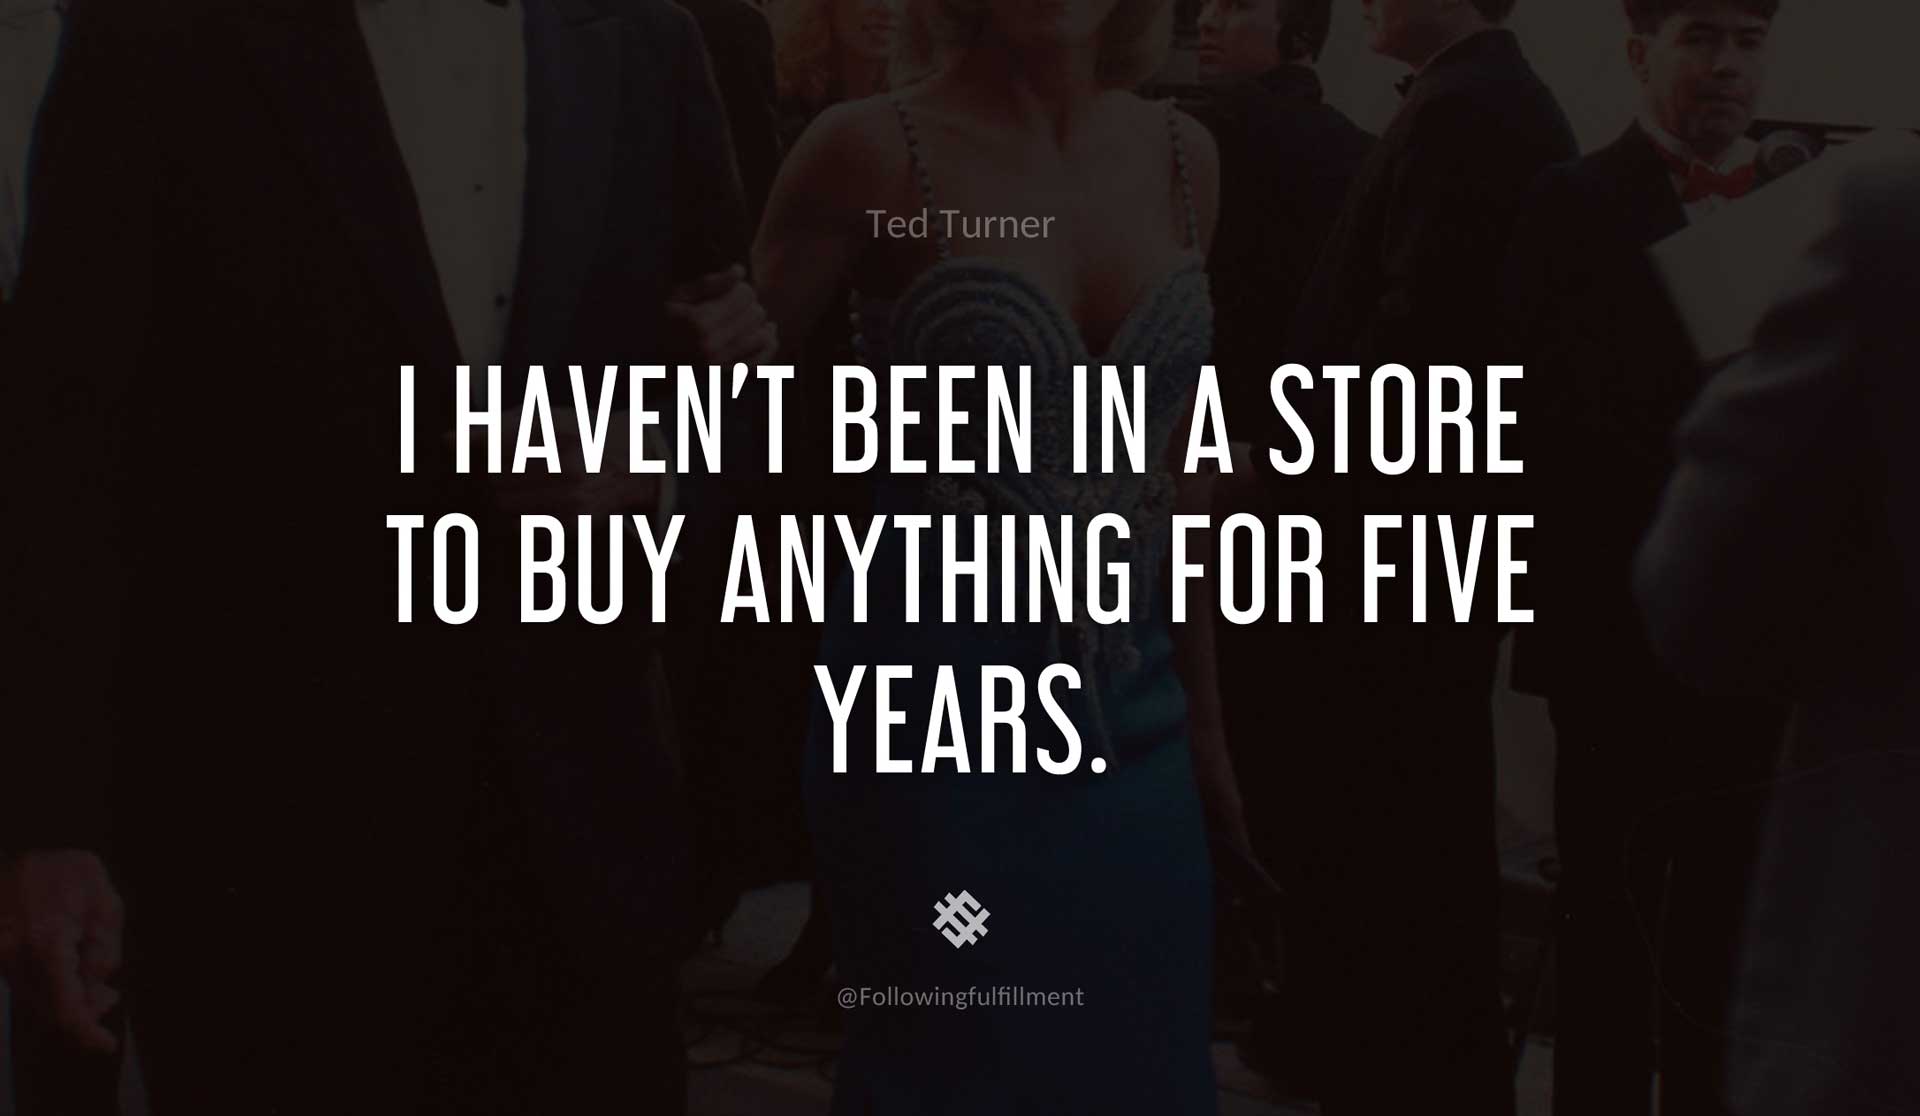 I-haven't-been-in-a-store-to-buy-anything-for-five-years.-TED-TURNER-Quote.jpg